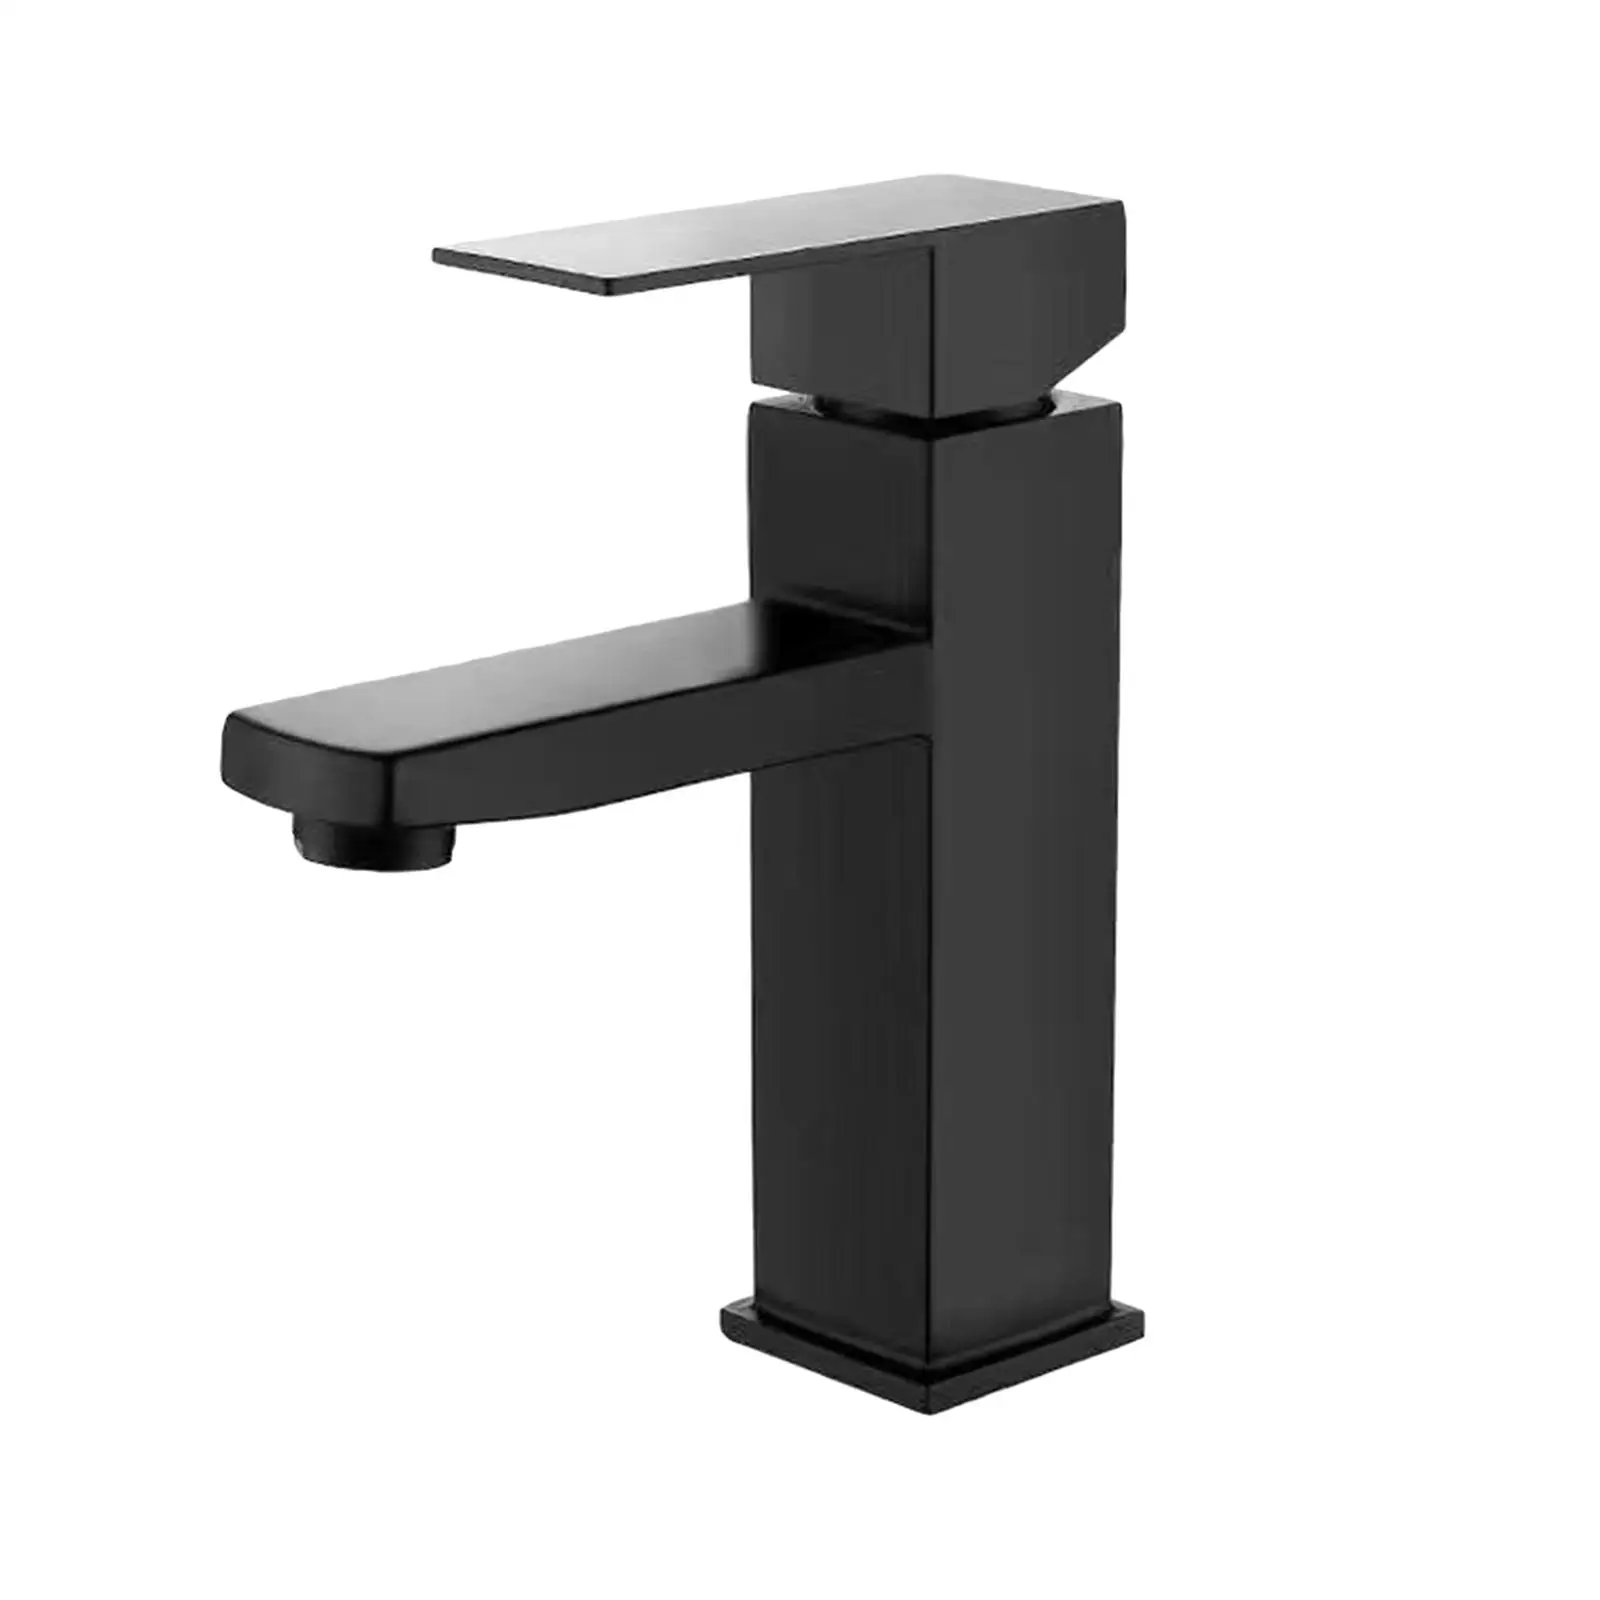 Bathroom Sink Faucet Rustproof Black Basin Faucet Durable Stainless Steel Hot and Cold Water for Sink Wash Basin Hotel